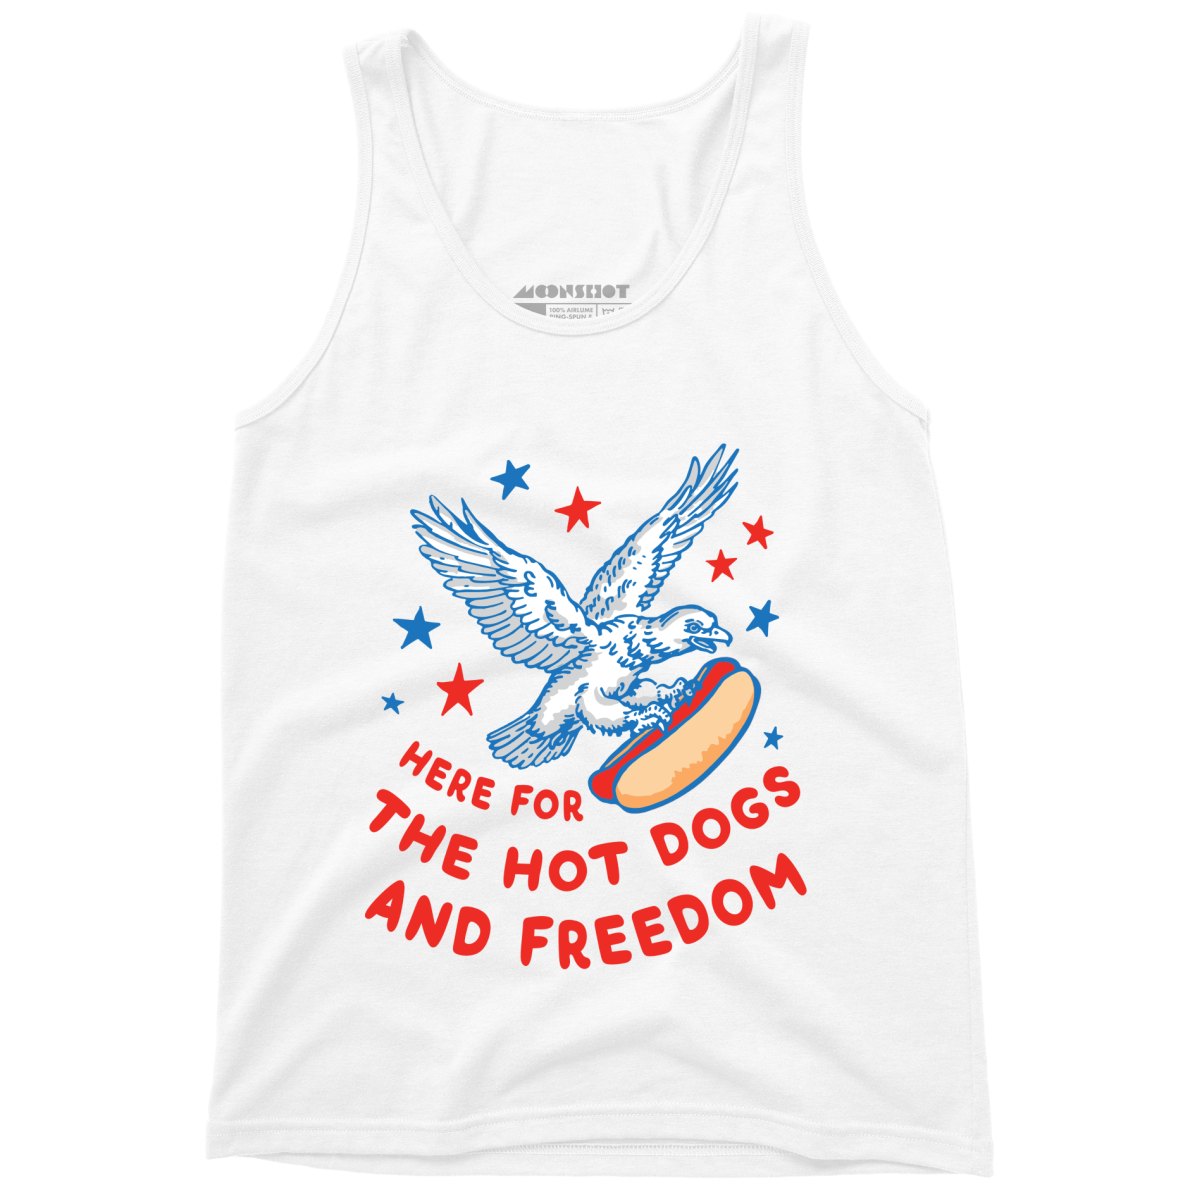 Here For The Hot Dogs and Freedom - Unisex Tank Top